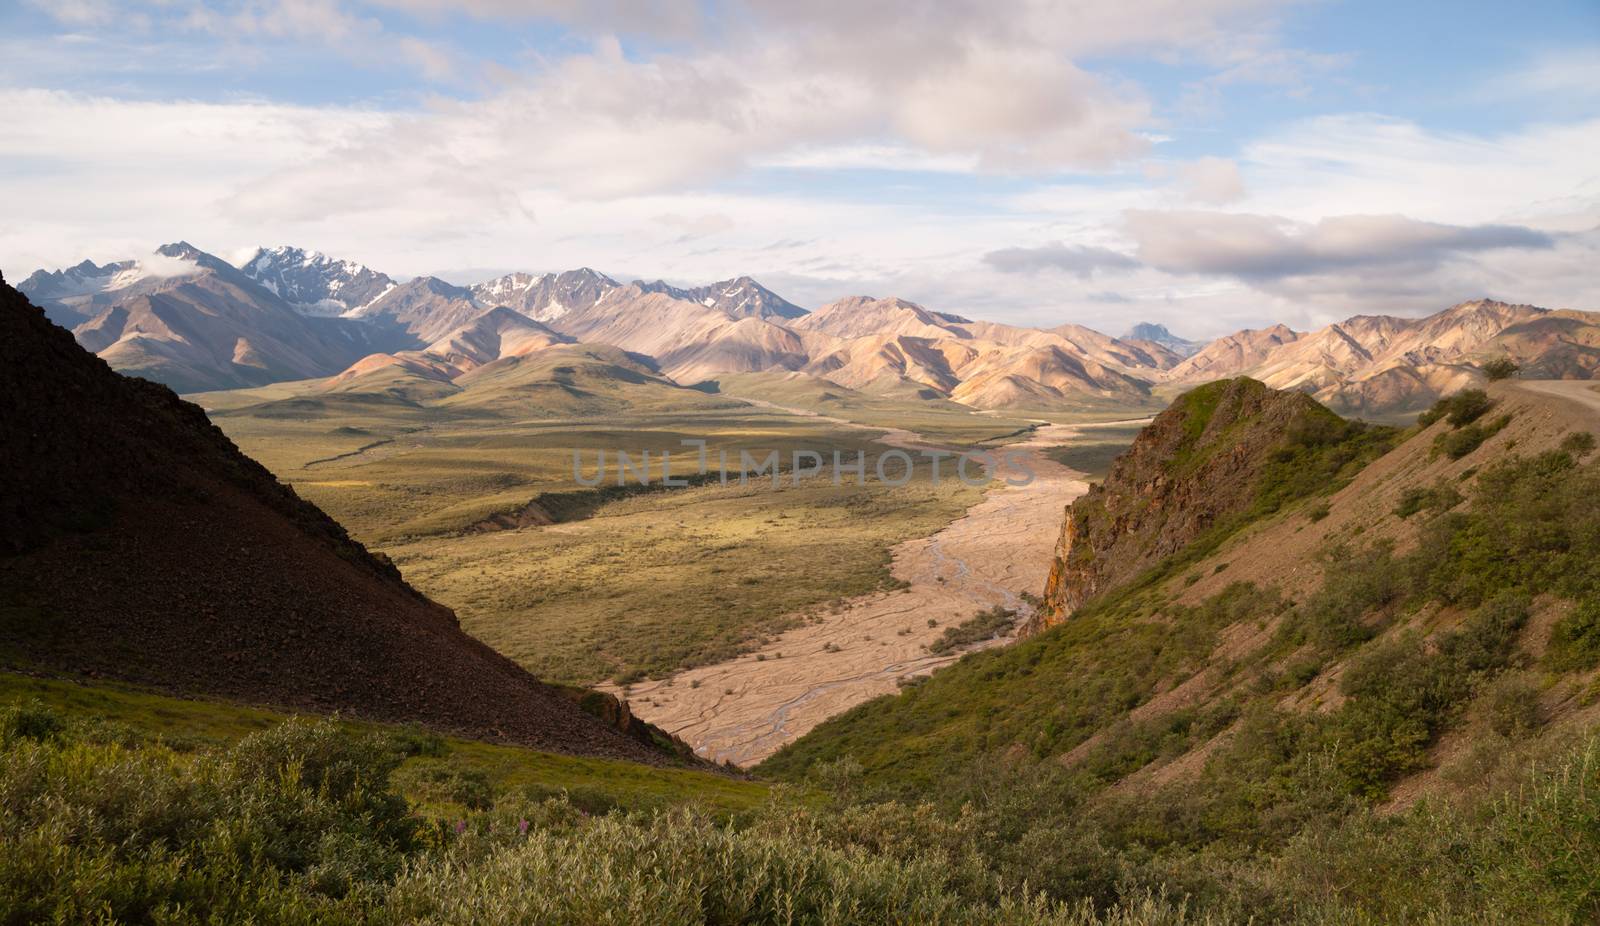 Valley and Mountains of the Alaska Denali Range by ChrisBoswell